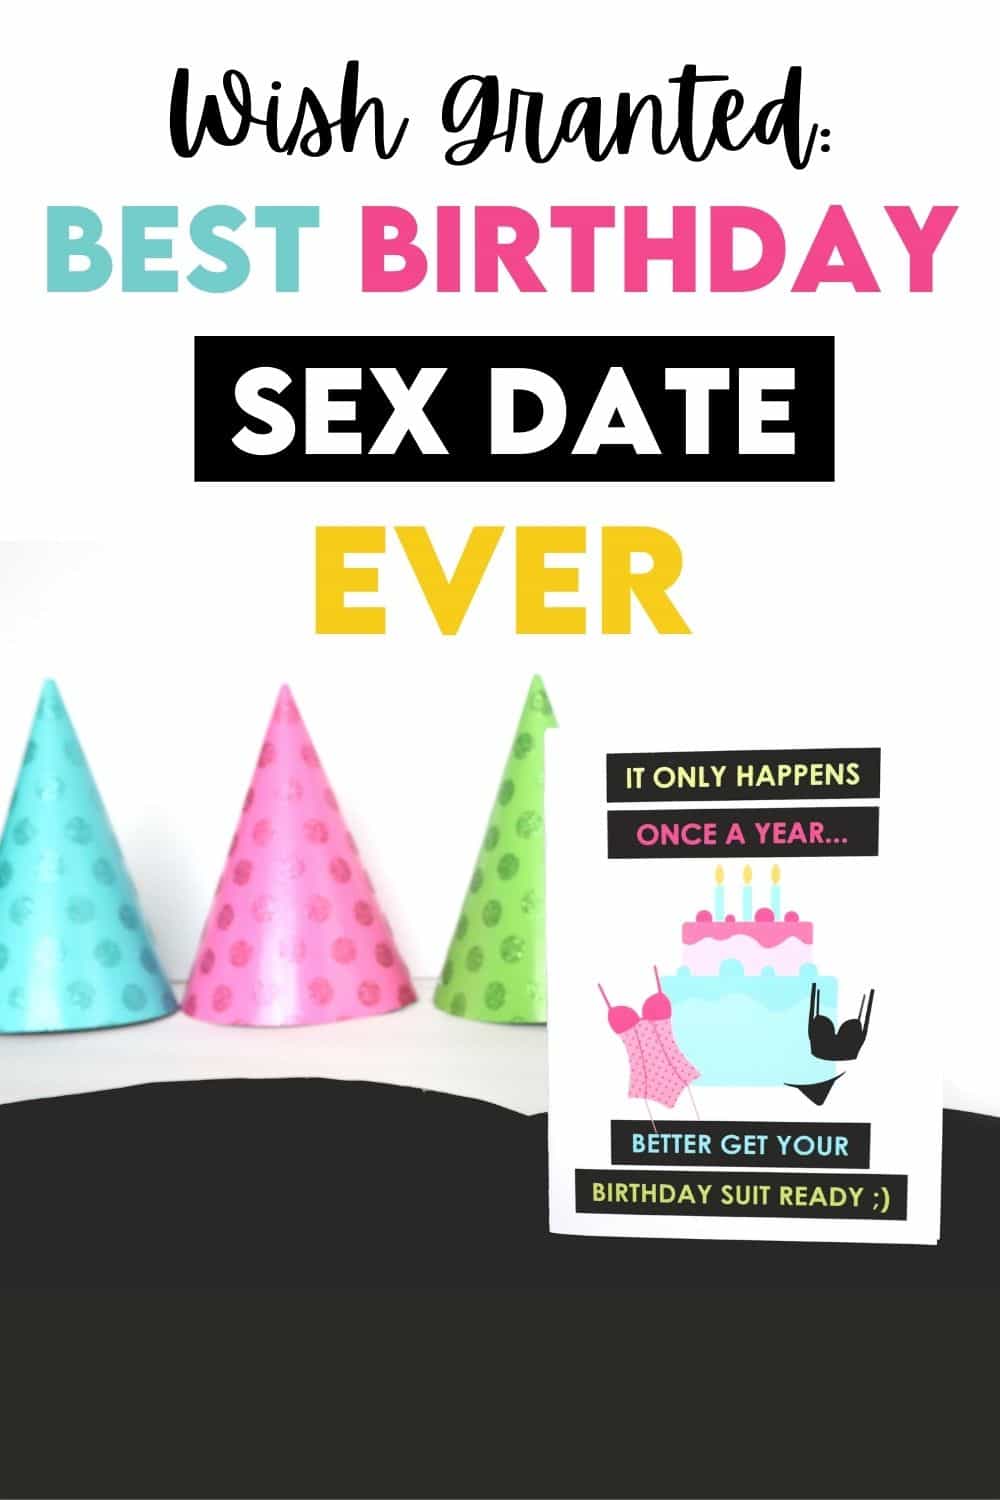 Epic Birthday Sex Date That Brings the Heat The Dating Divas pic